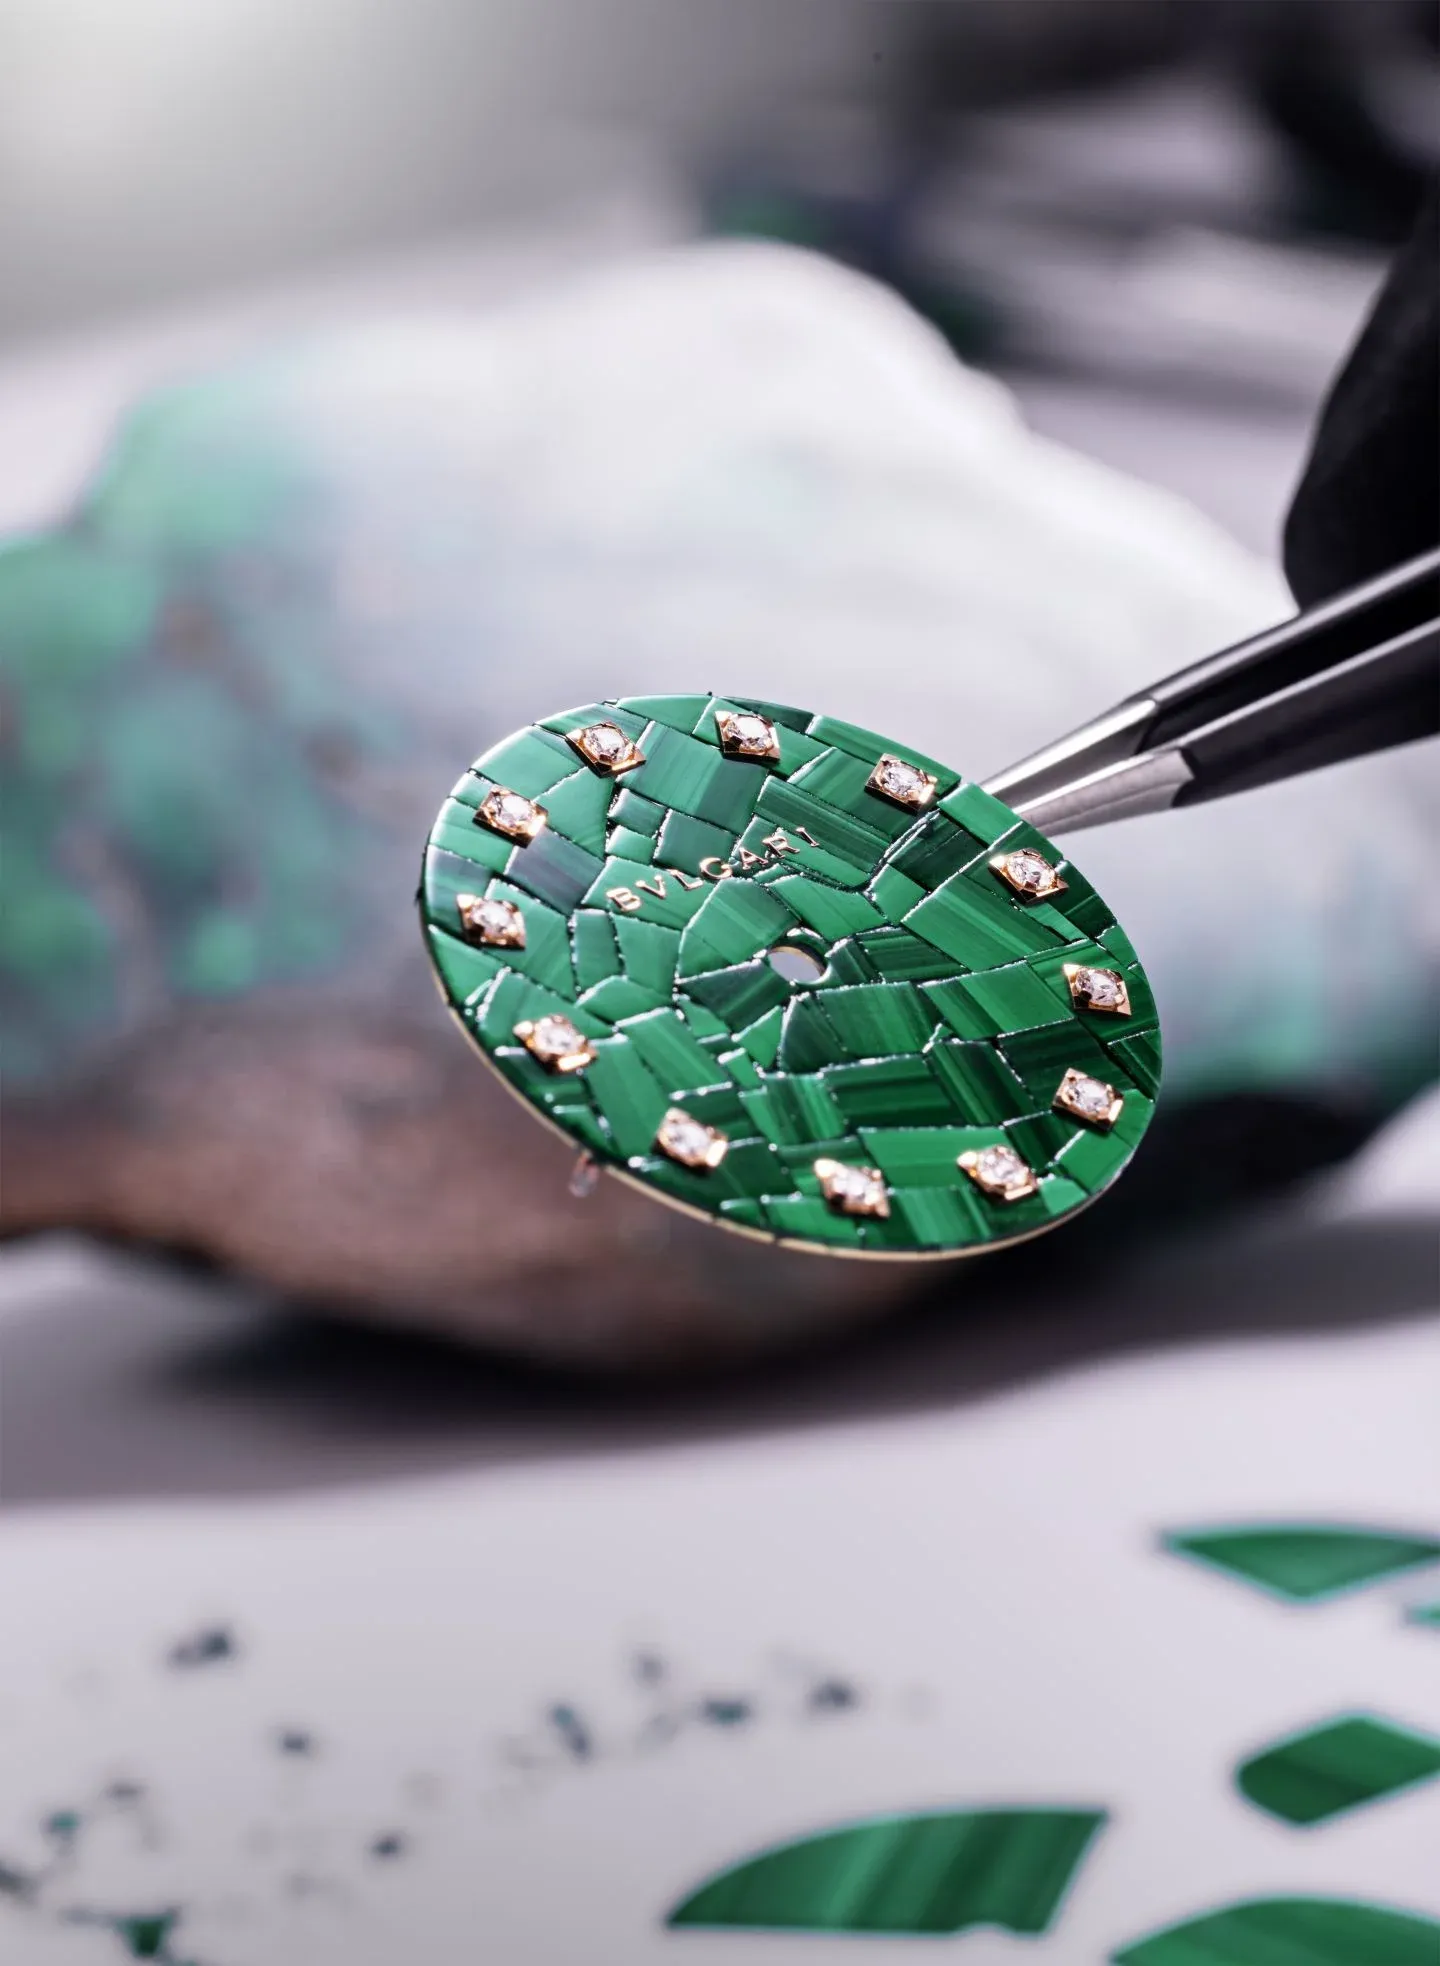 Crafting the malachite green dial is an intensely laborious process